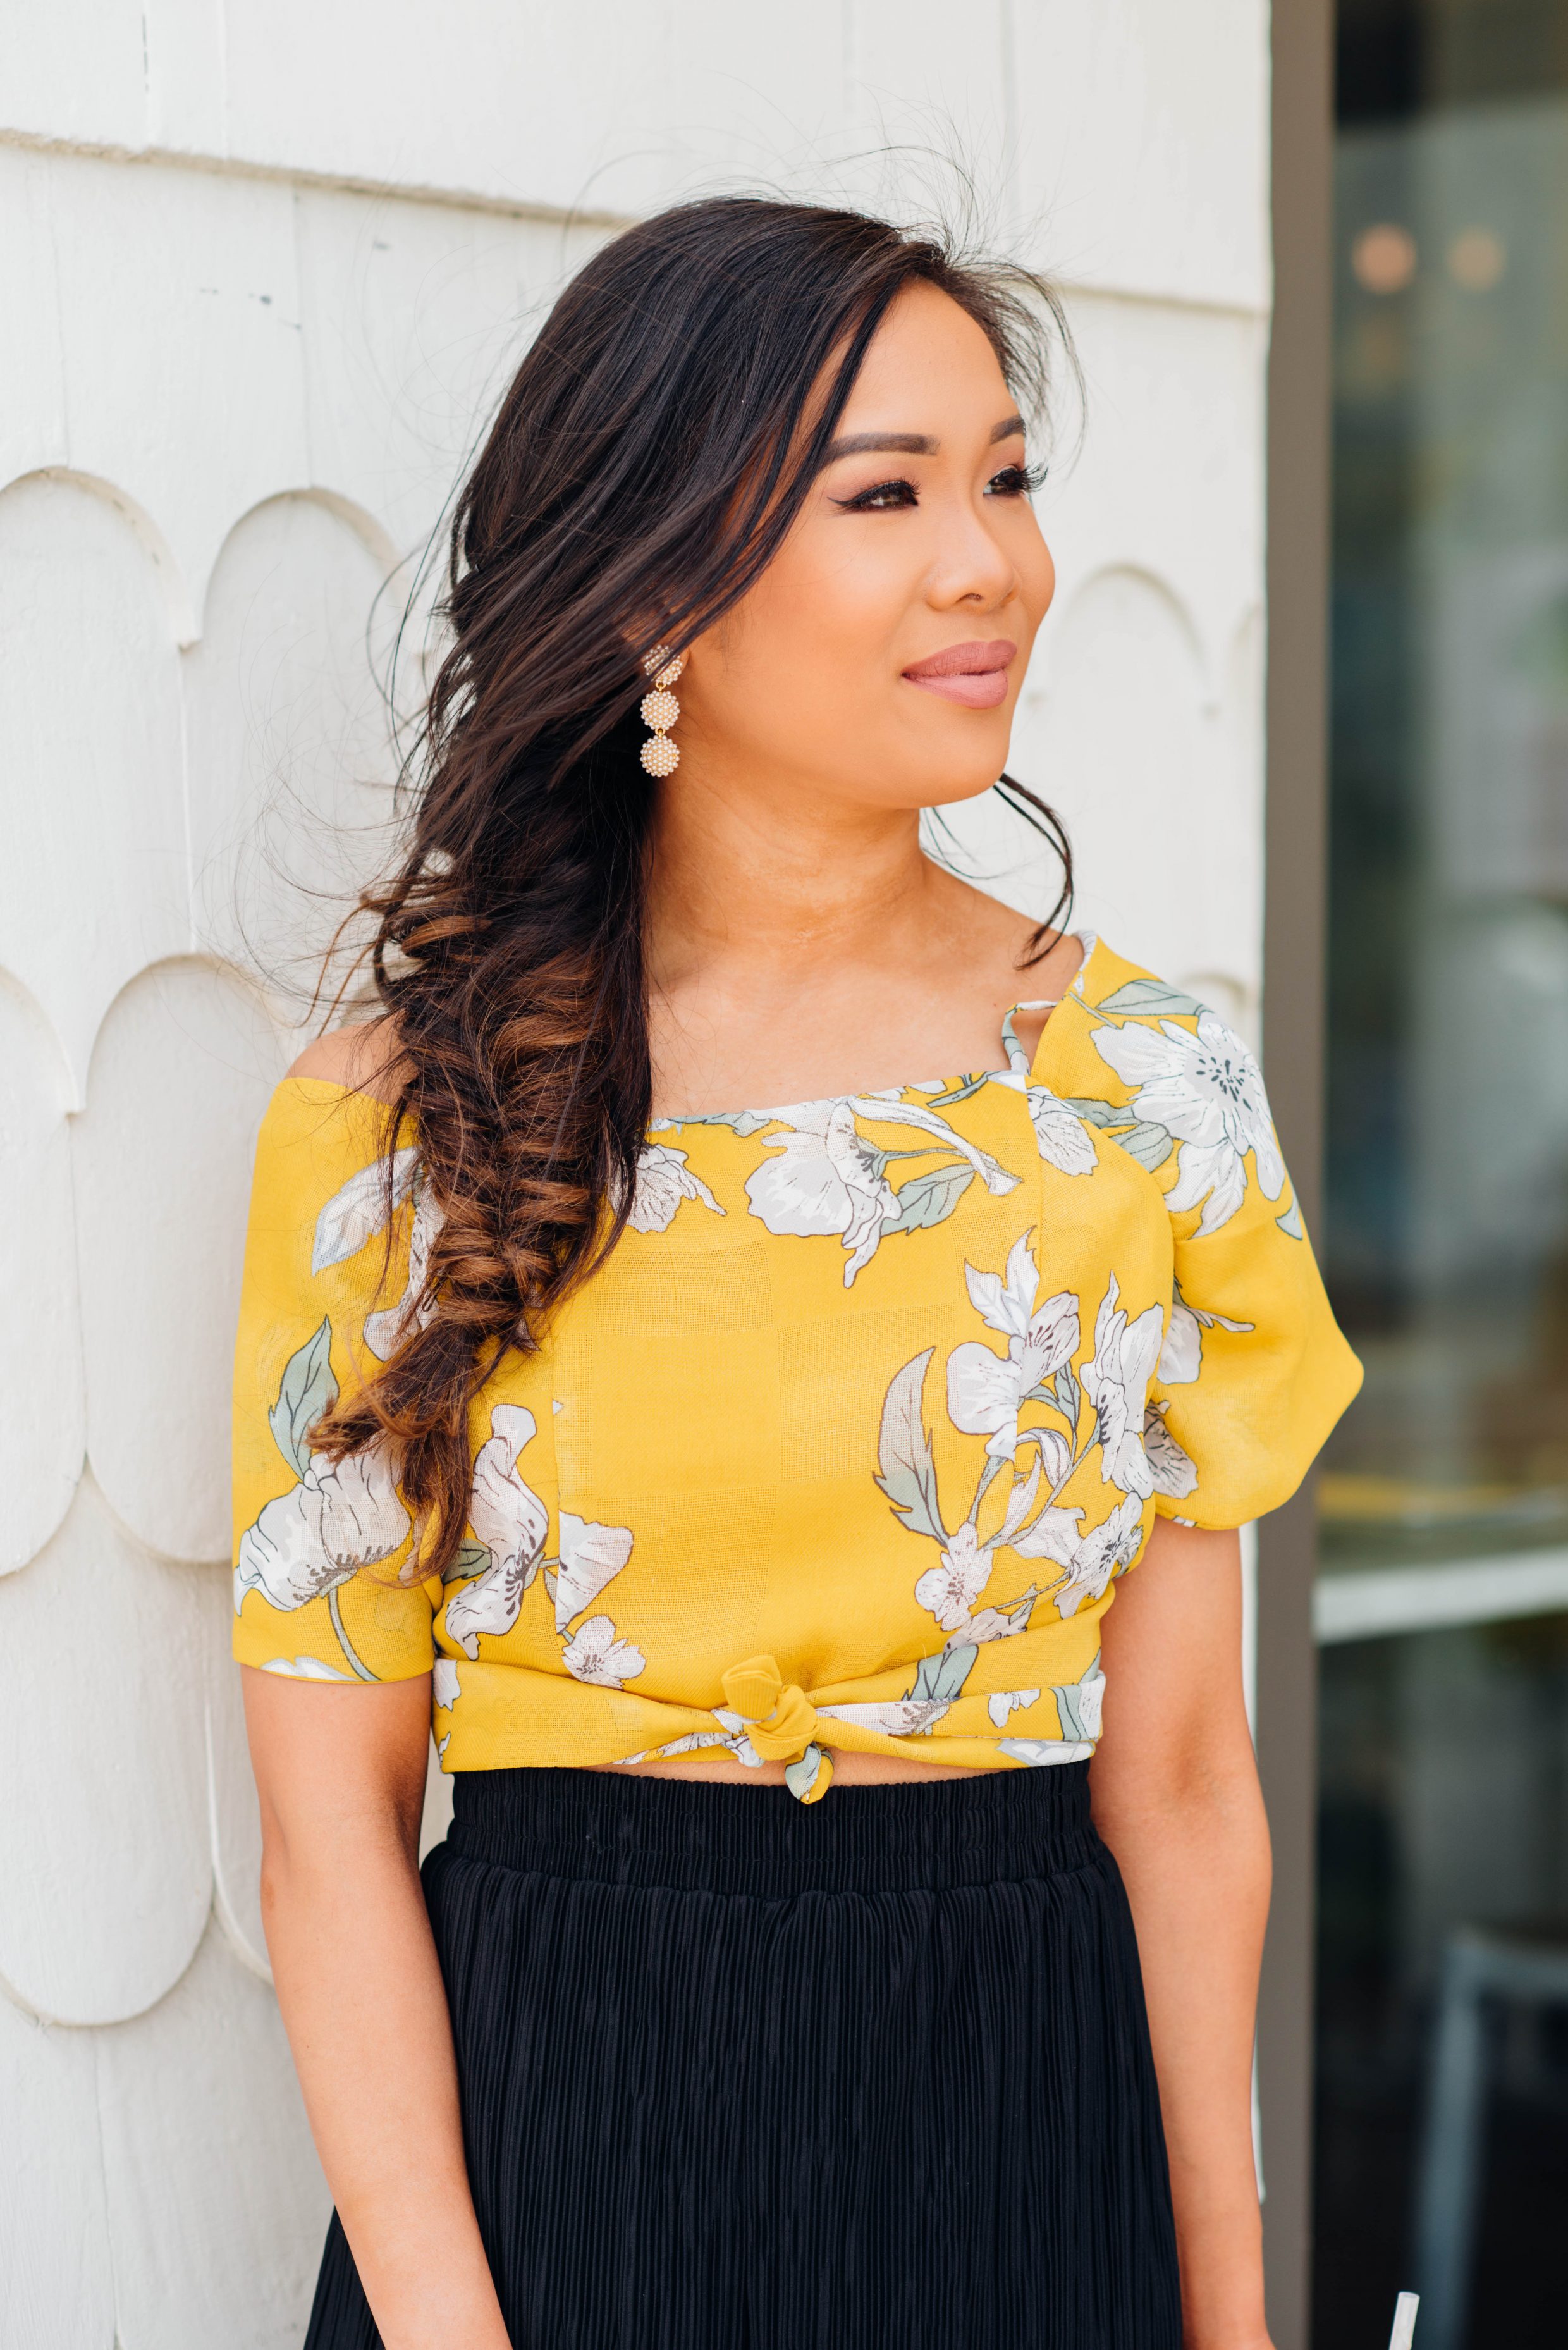 Hoang-Kim wears a JOA Tie-front crop top with Olive + Piper pearl earrings and a fishtail braid